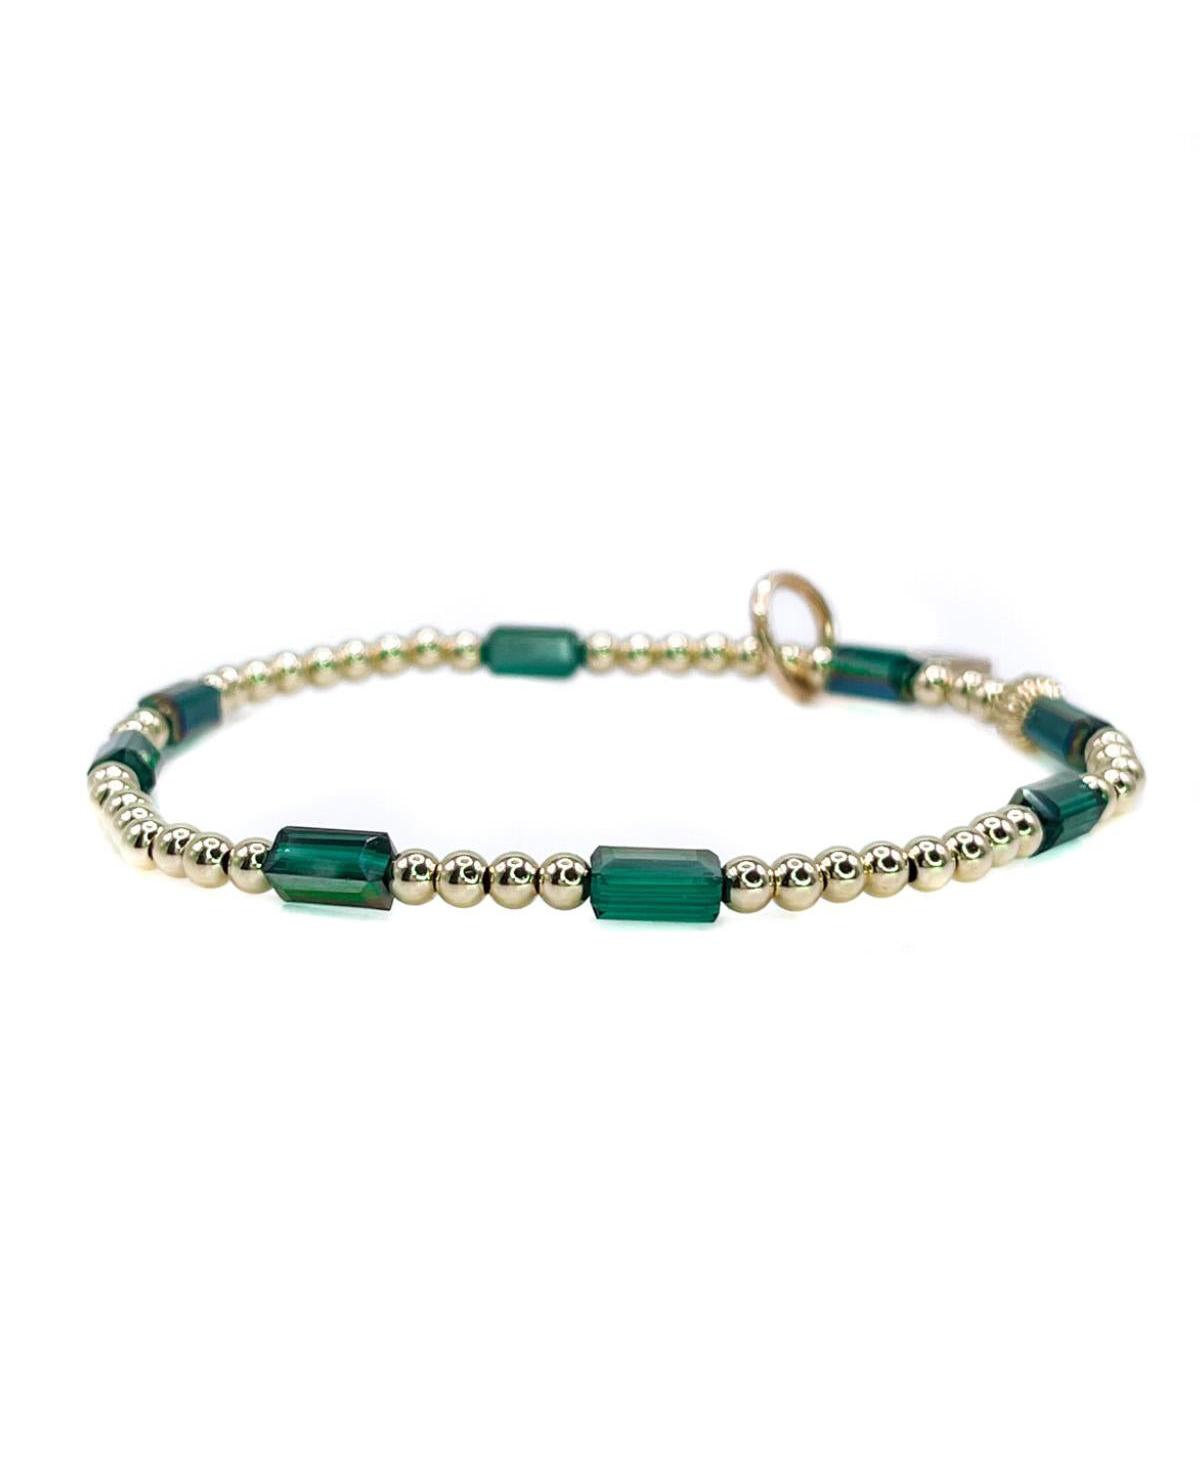 Non-Tarnishing Gold filled, 3mm Gold Ball and Emerald Glass Bead Stretch Bracelet - Gold  emerald